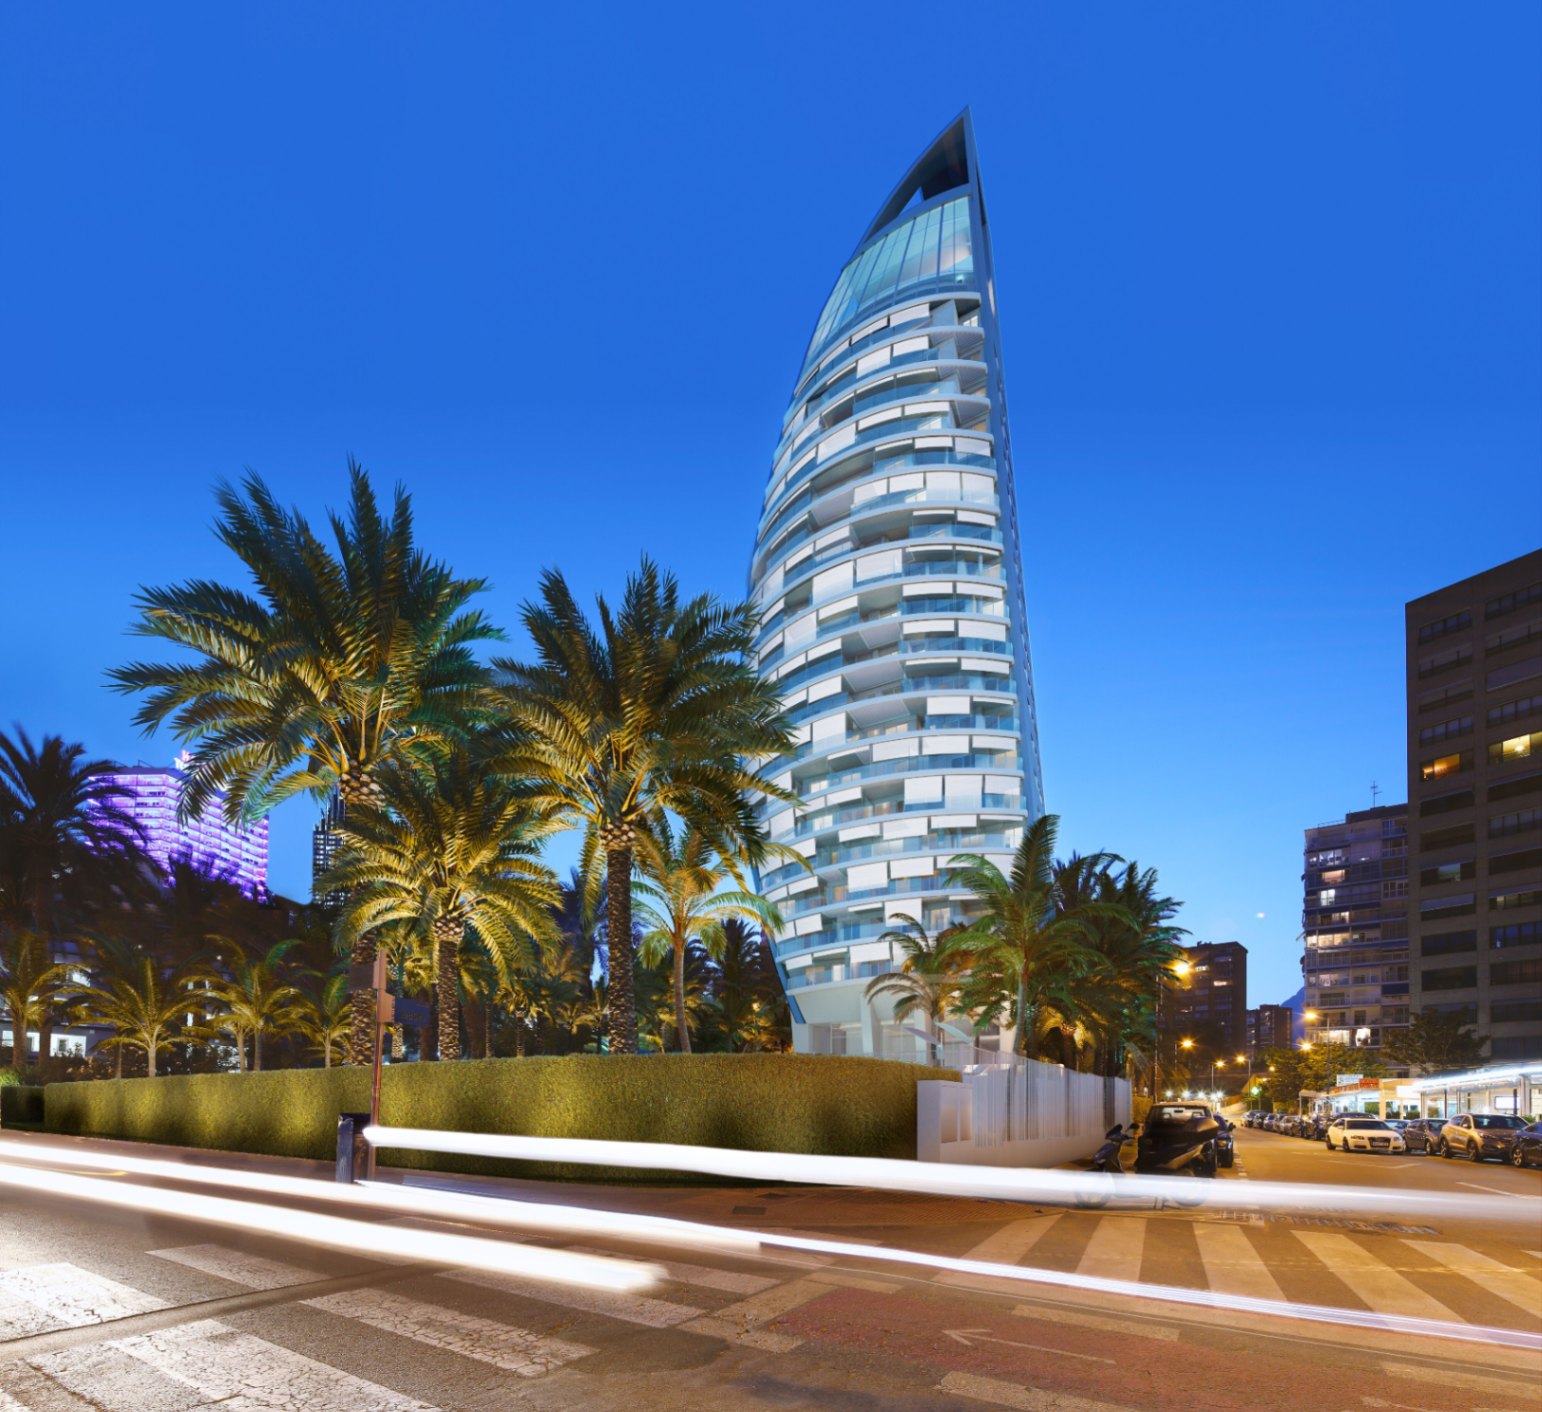 Luxury Apartments in Delfin Tower, Benidorm: Discover the Pinnacle of Exclusive Lifestyle with Panoramic Views